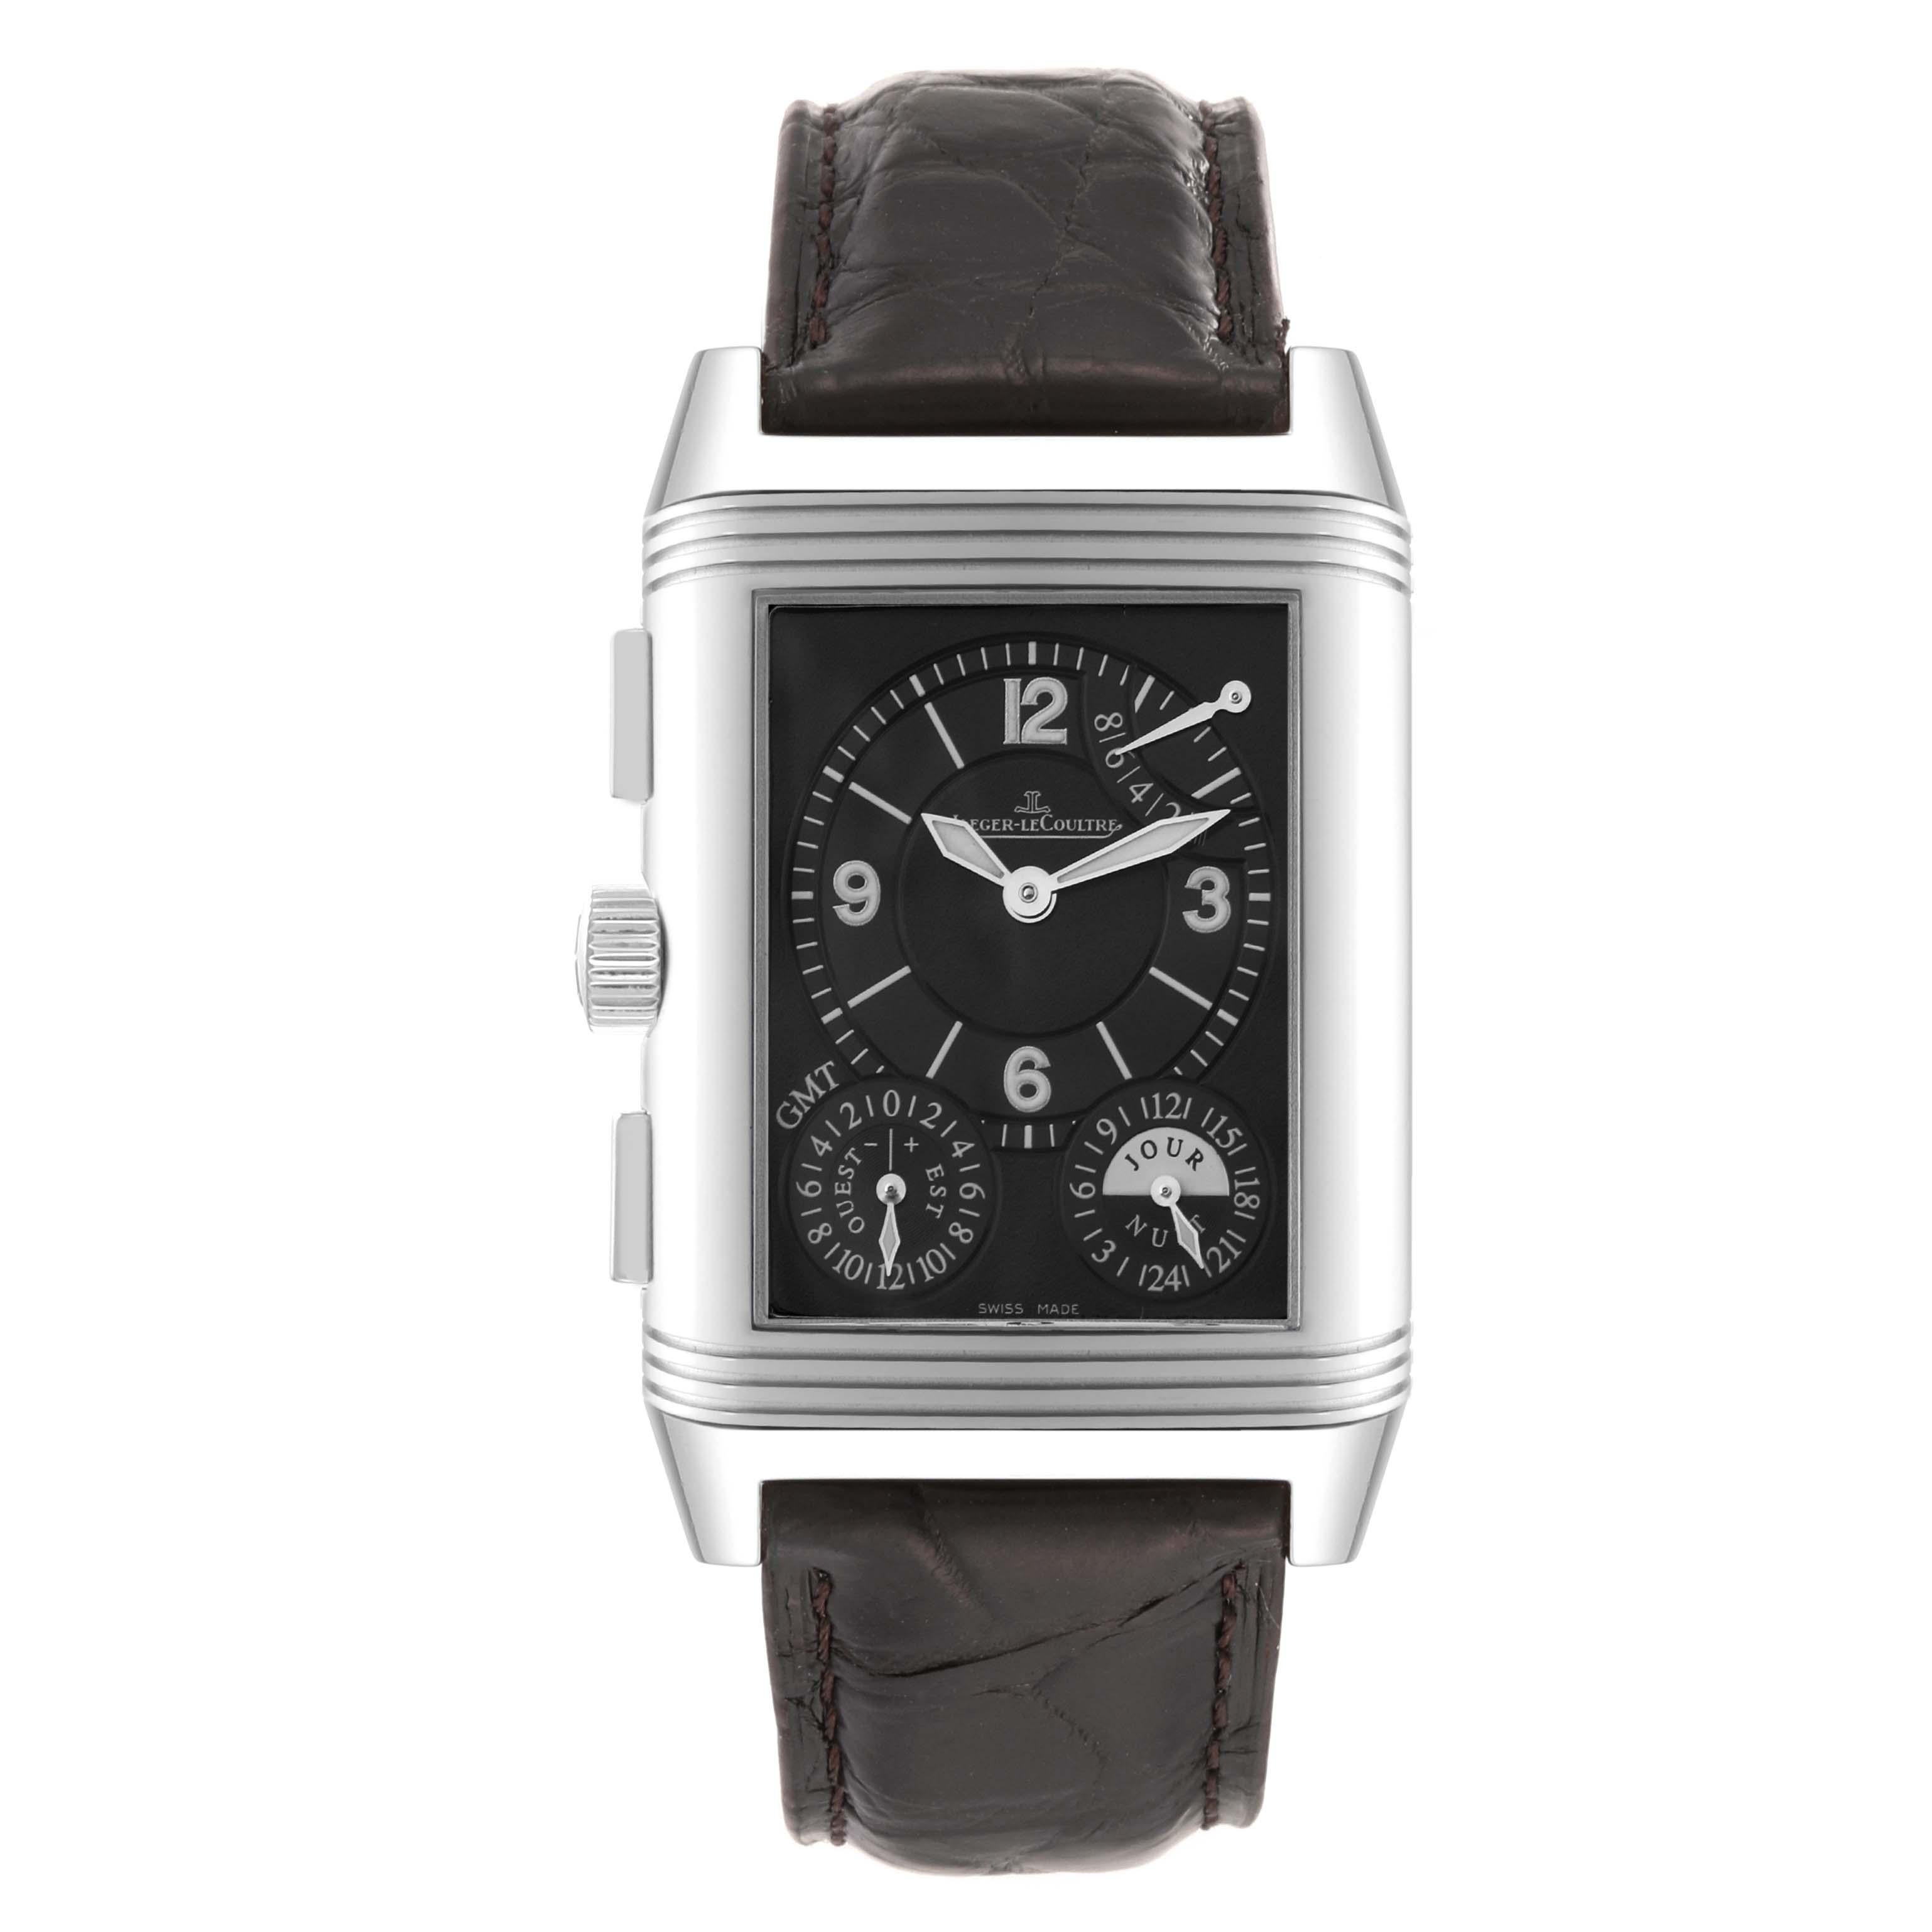 Jaeger LeCoultre Reverso Grande GMT Steel Mens Watch 240.8.18 Q3028420 Papers. Manual winding movement. Stainless steel 47.0 x 29.0 mm rectangular case rotating within its back plate. Stainless steel reeded bezel. Scratch resistant sapphire crystal.